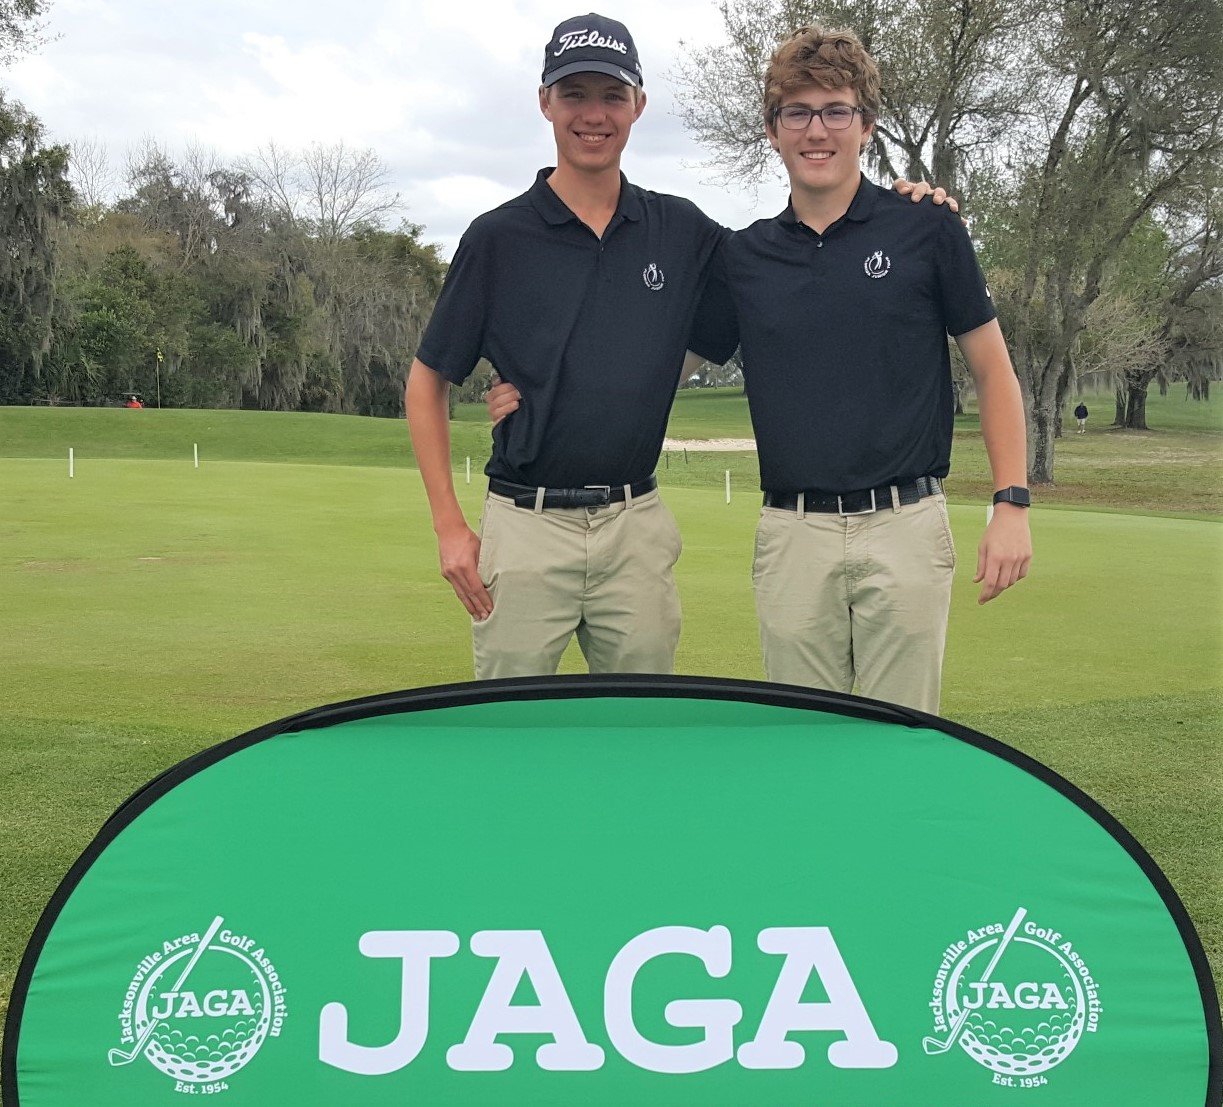 Teenagers, Moses Compaan and Chase Carroll teamed up to shoot a 7-under to win the 2022 JAGA Spring Four-ball Championship at Palatka Golf Club March 14.